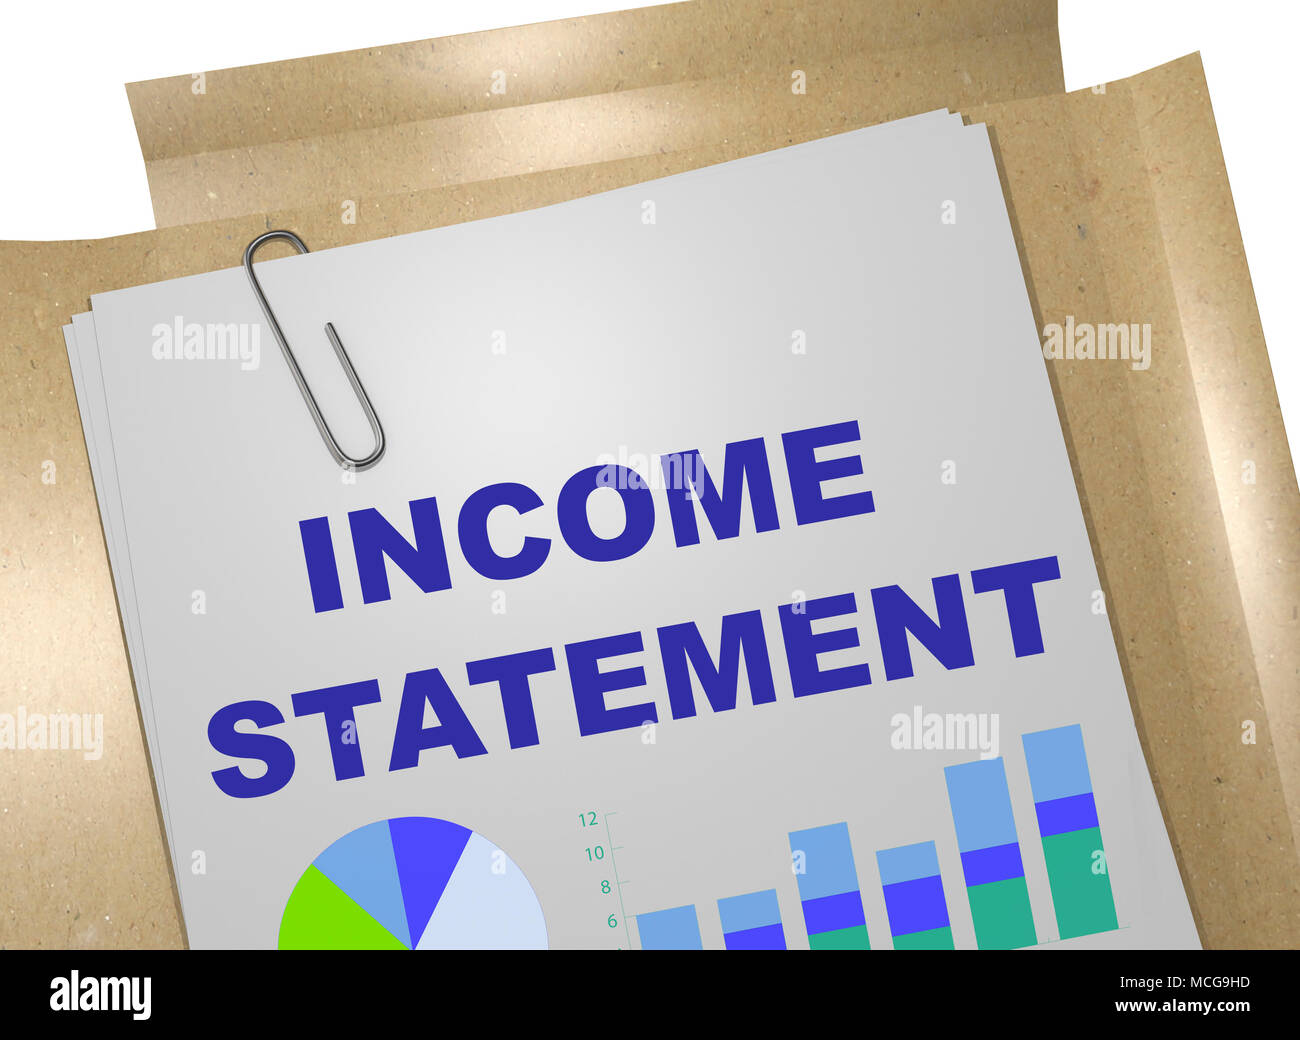 3D illustration of INCOME STATEMENT title on business document Stock Photo